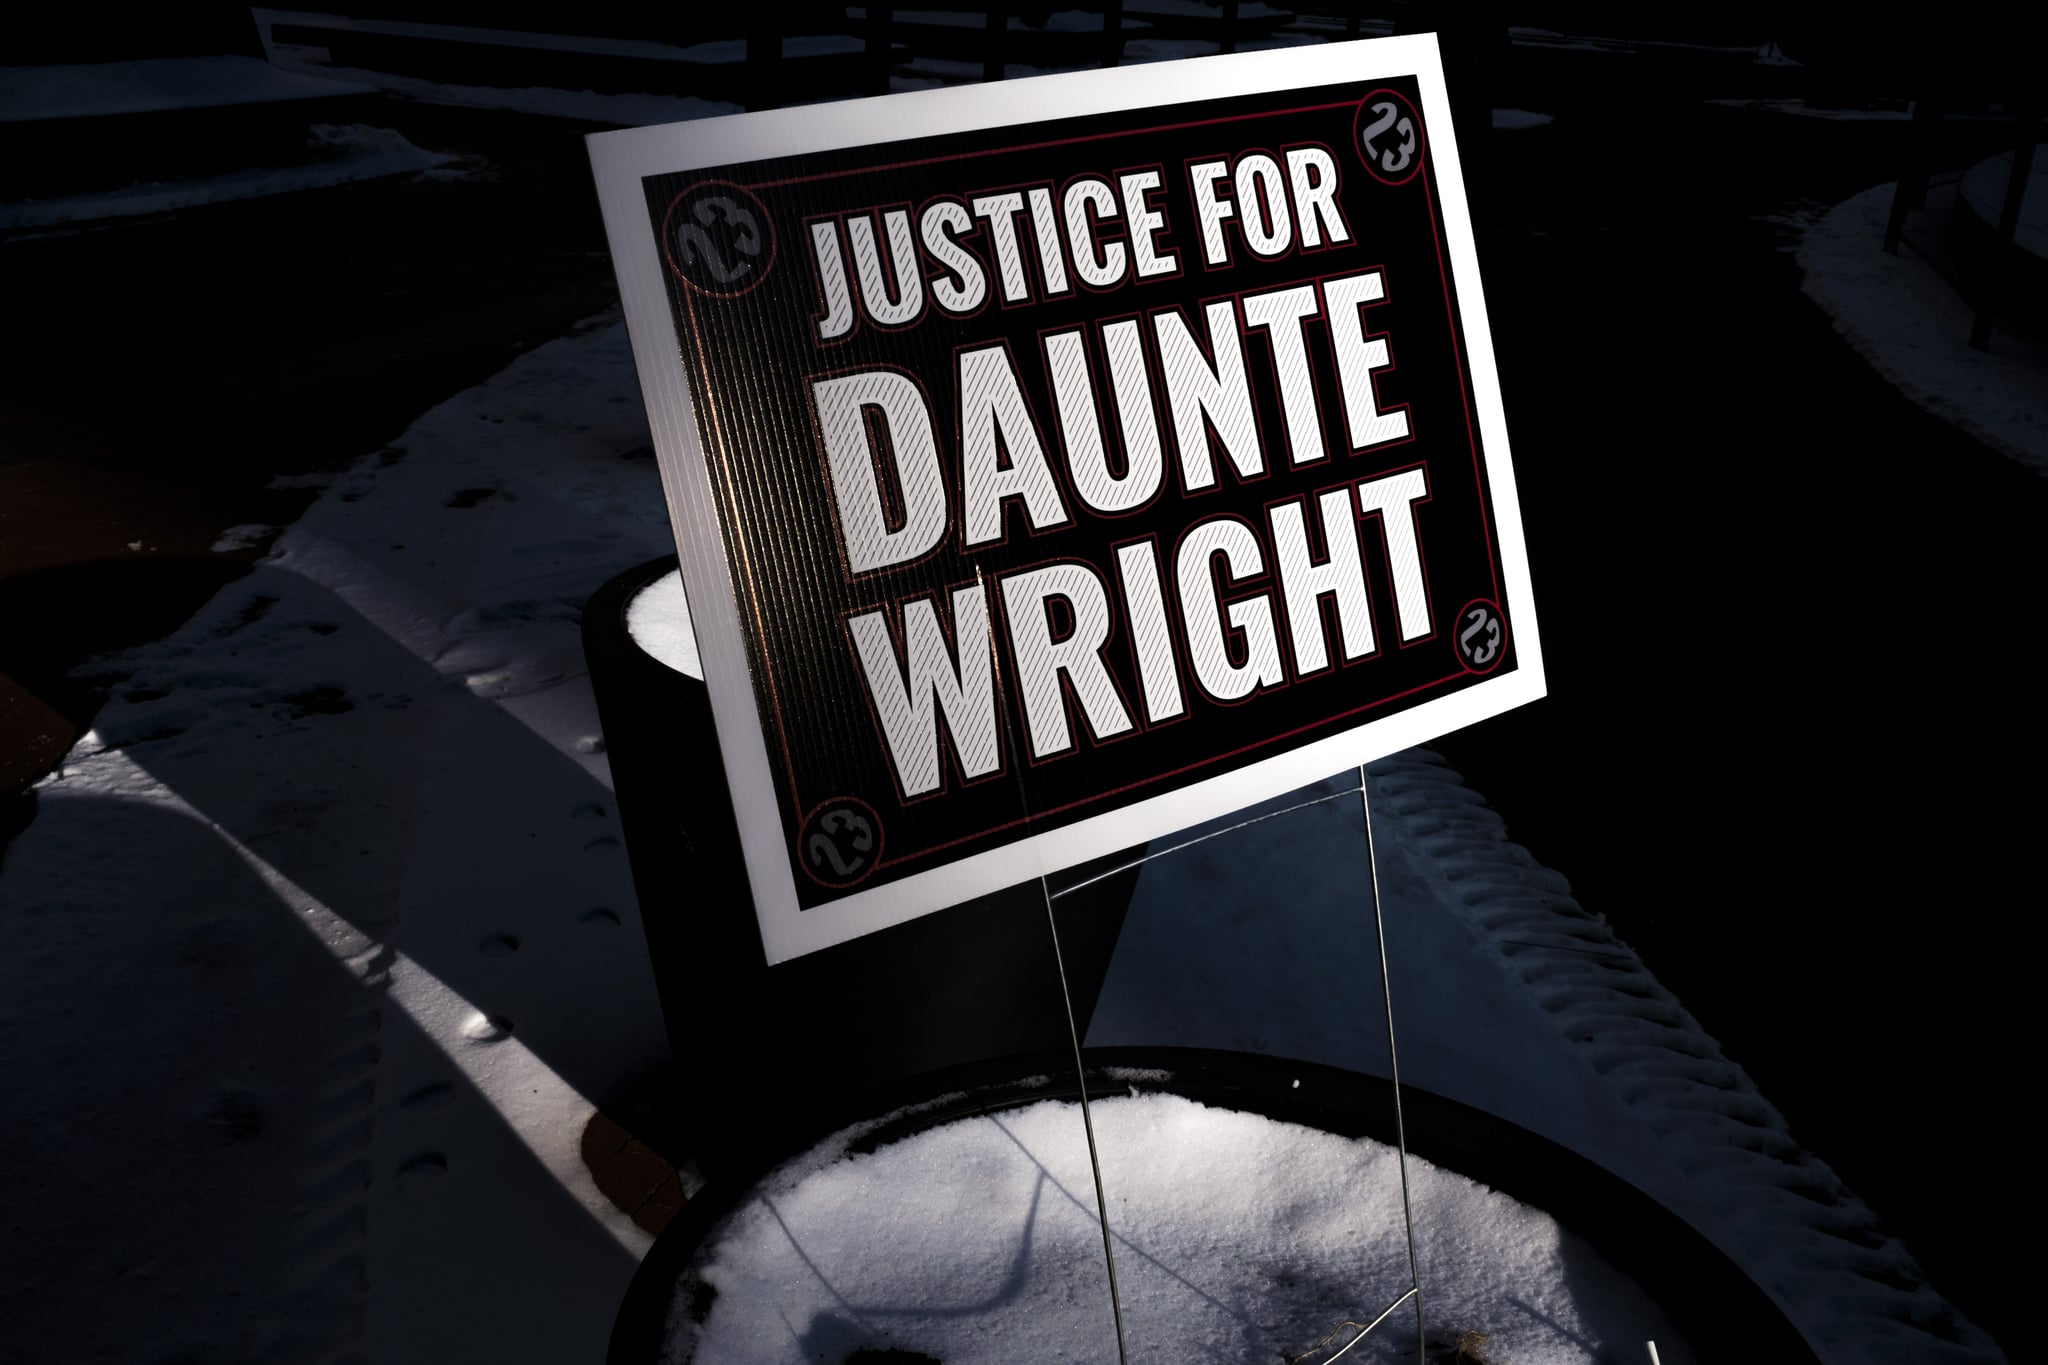 MINNEAPOLIS, MN - DECEMBER 23: A sign reading Justice for Daunte Wright is placed outside the Hennepin County Government Center on December 23, 2021 in Minneapolis, Minnesota. Jury deliberations are ongoing in the trial of former Brooklyn Center police officer Kim Potter, who is charged with manslaughter in the April 2021 shooting death of Daunte Wright. Potter says she thought she was using her Taser when she shot Wright with her handgun. (Photo by Stephen Maturen/Getty Images)